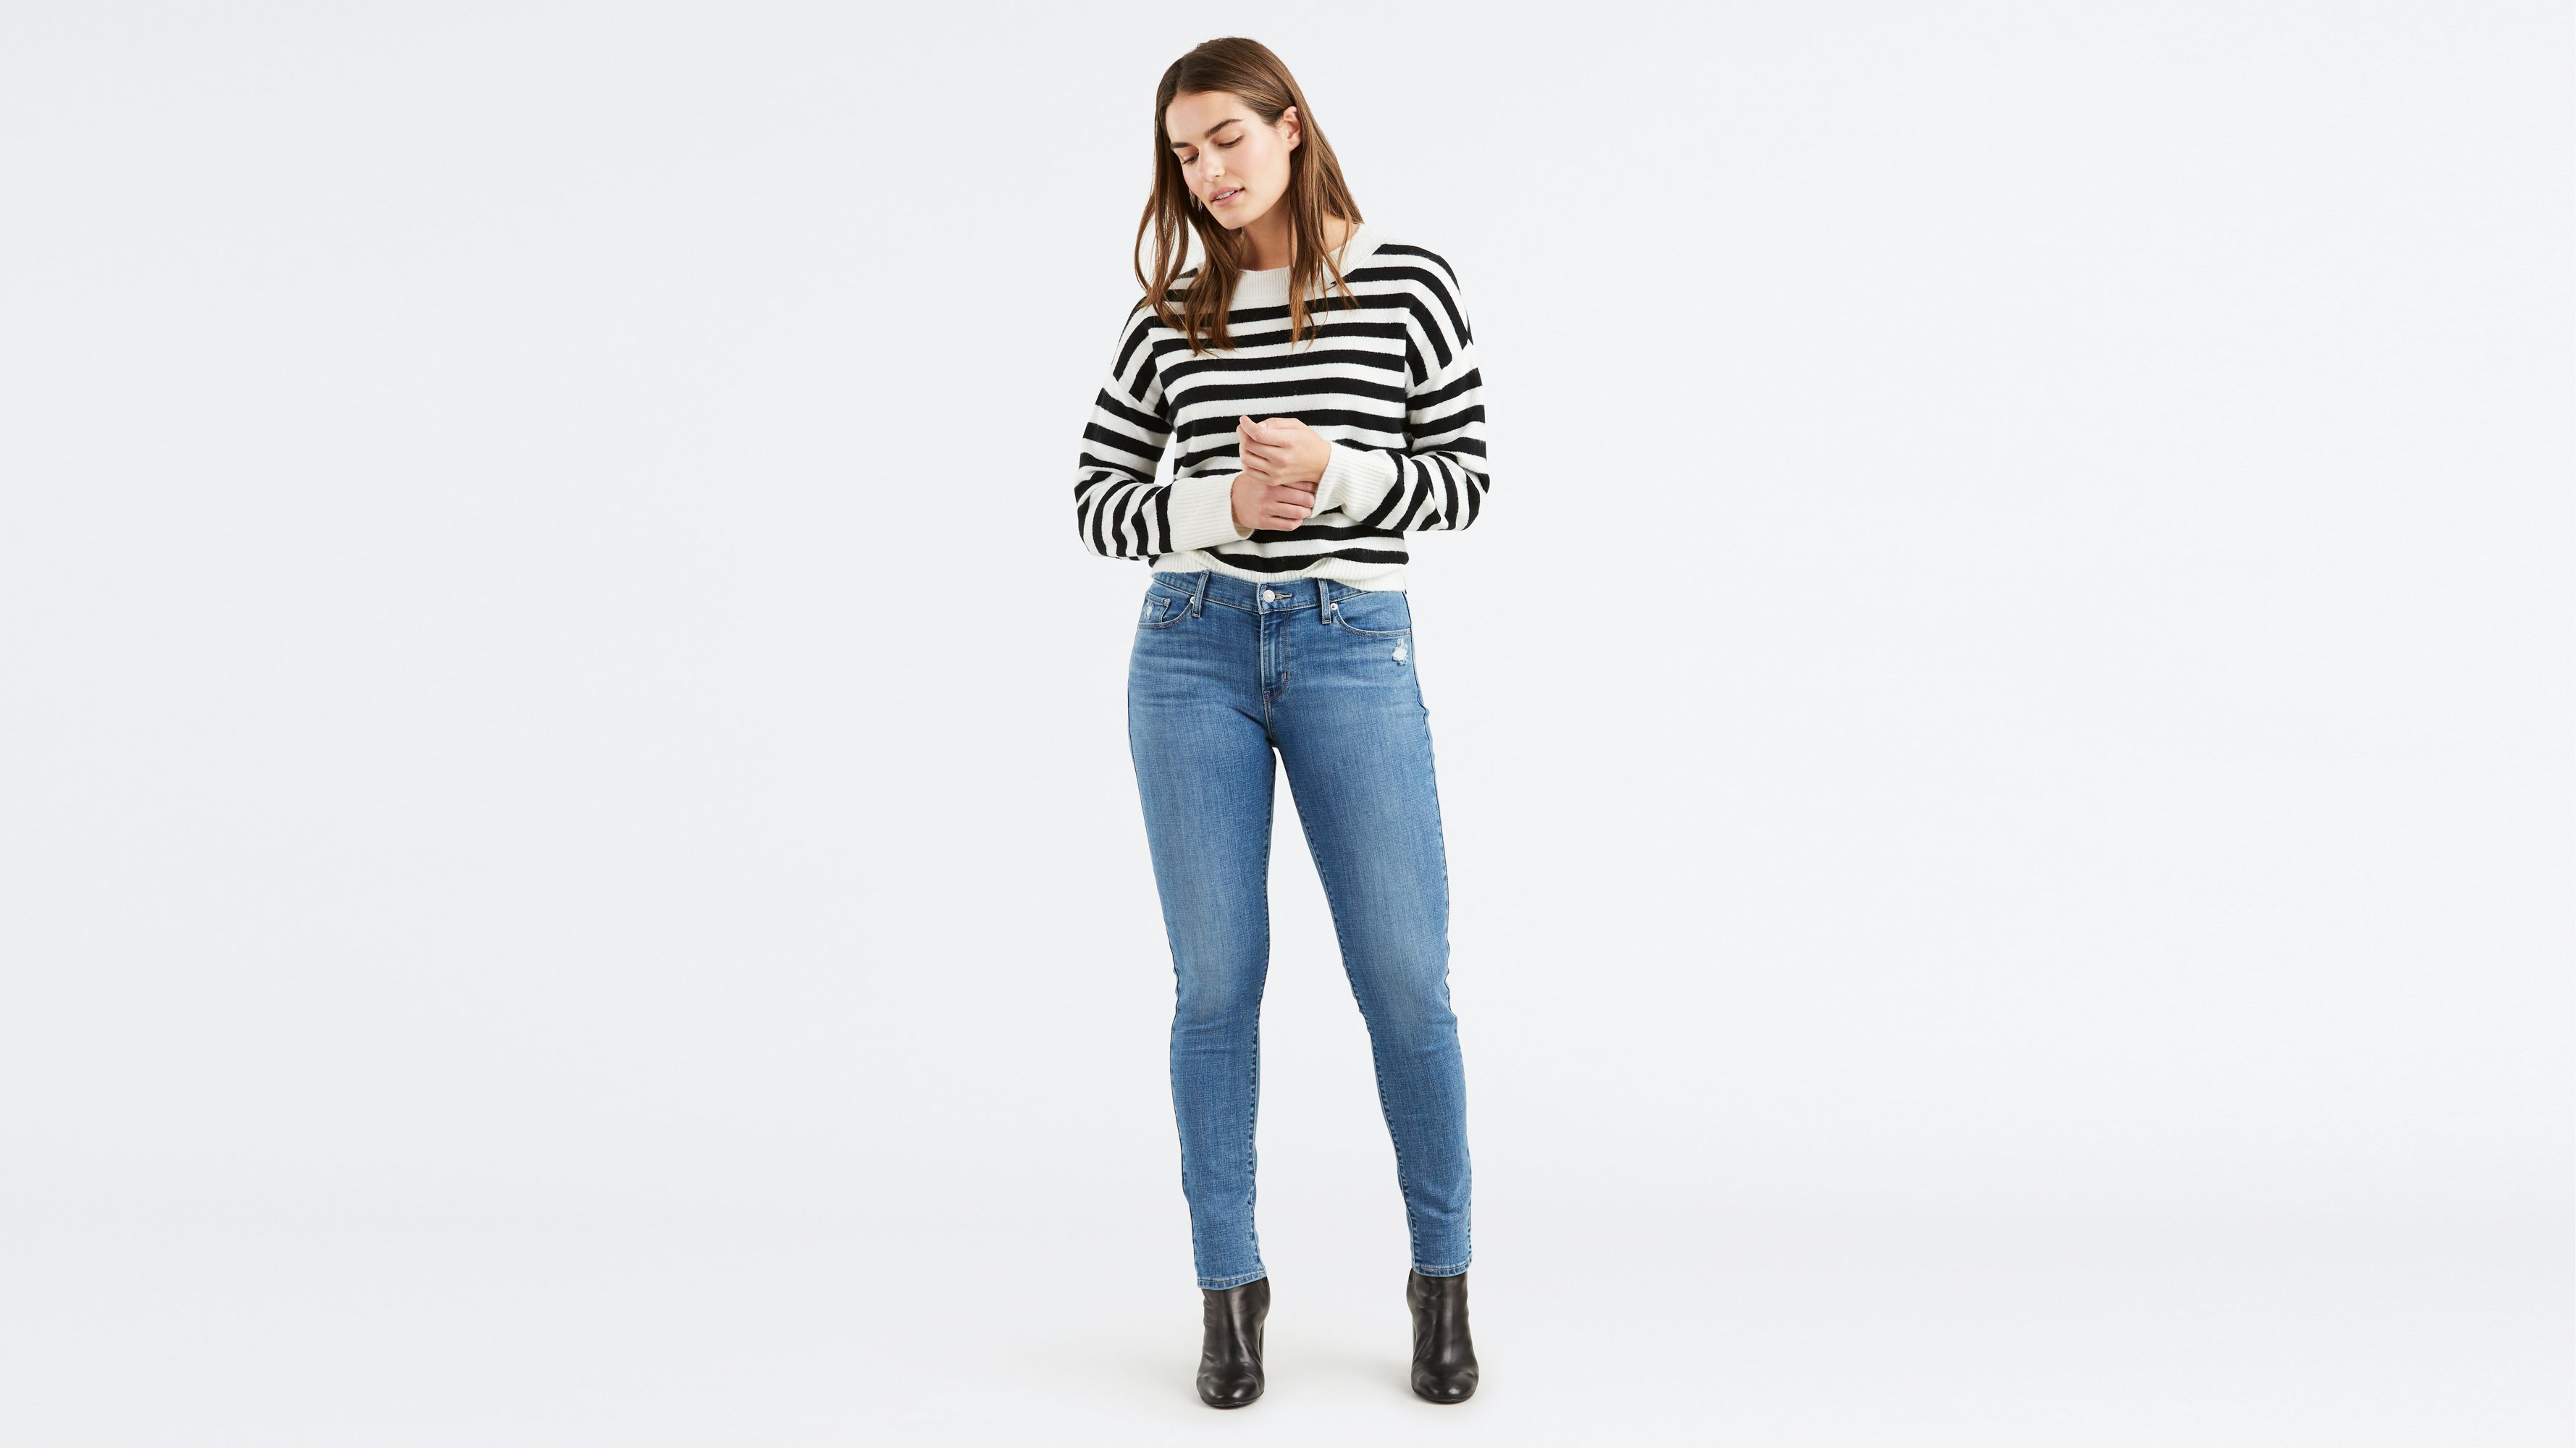 levi's curvy skinny jeans review